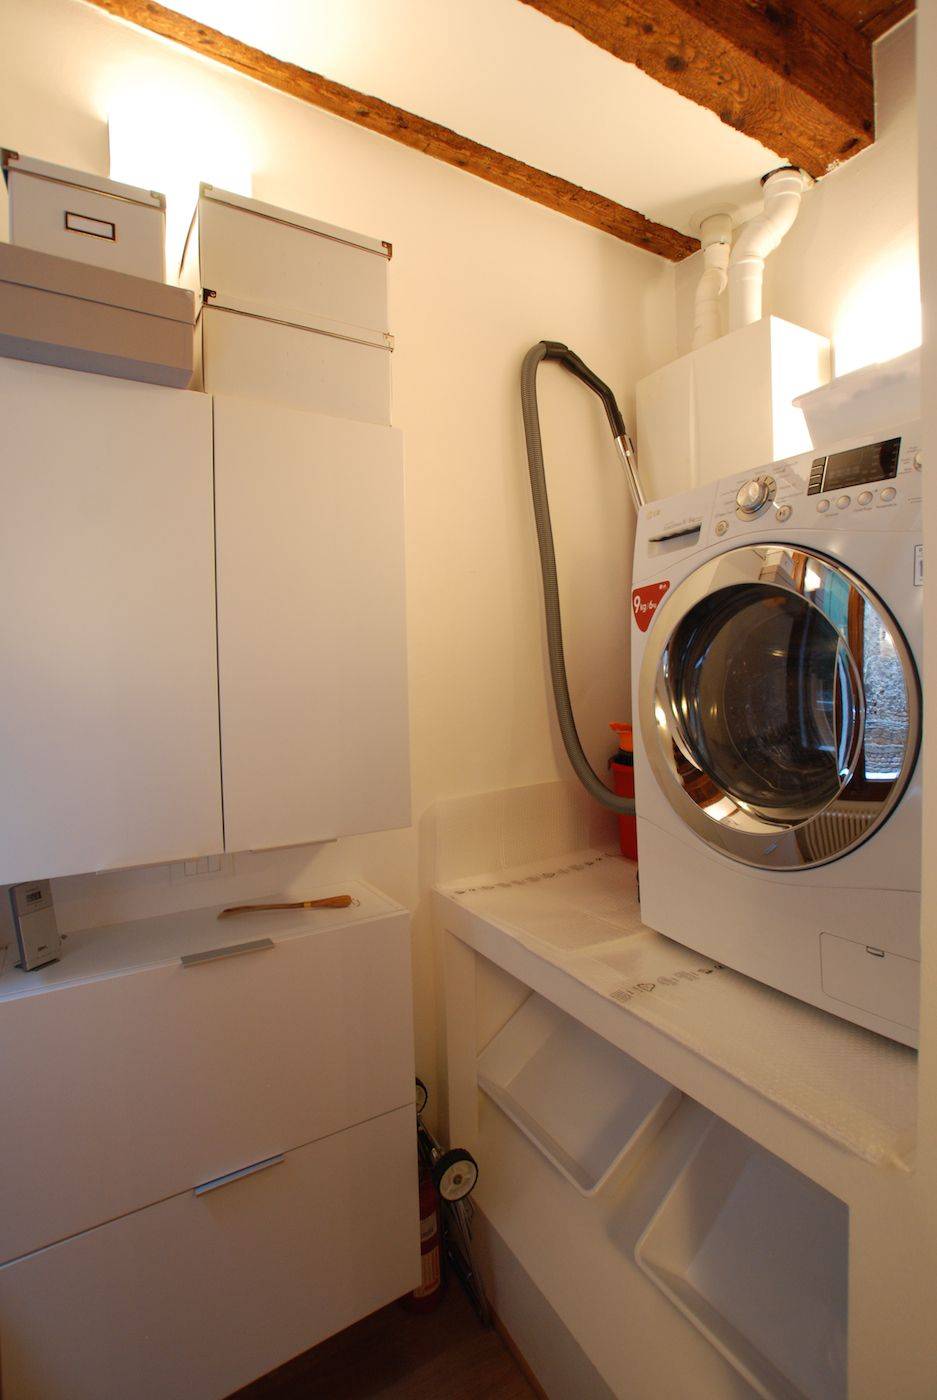 there is also a small laundry with all-in-one washer and dryer